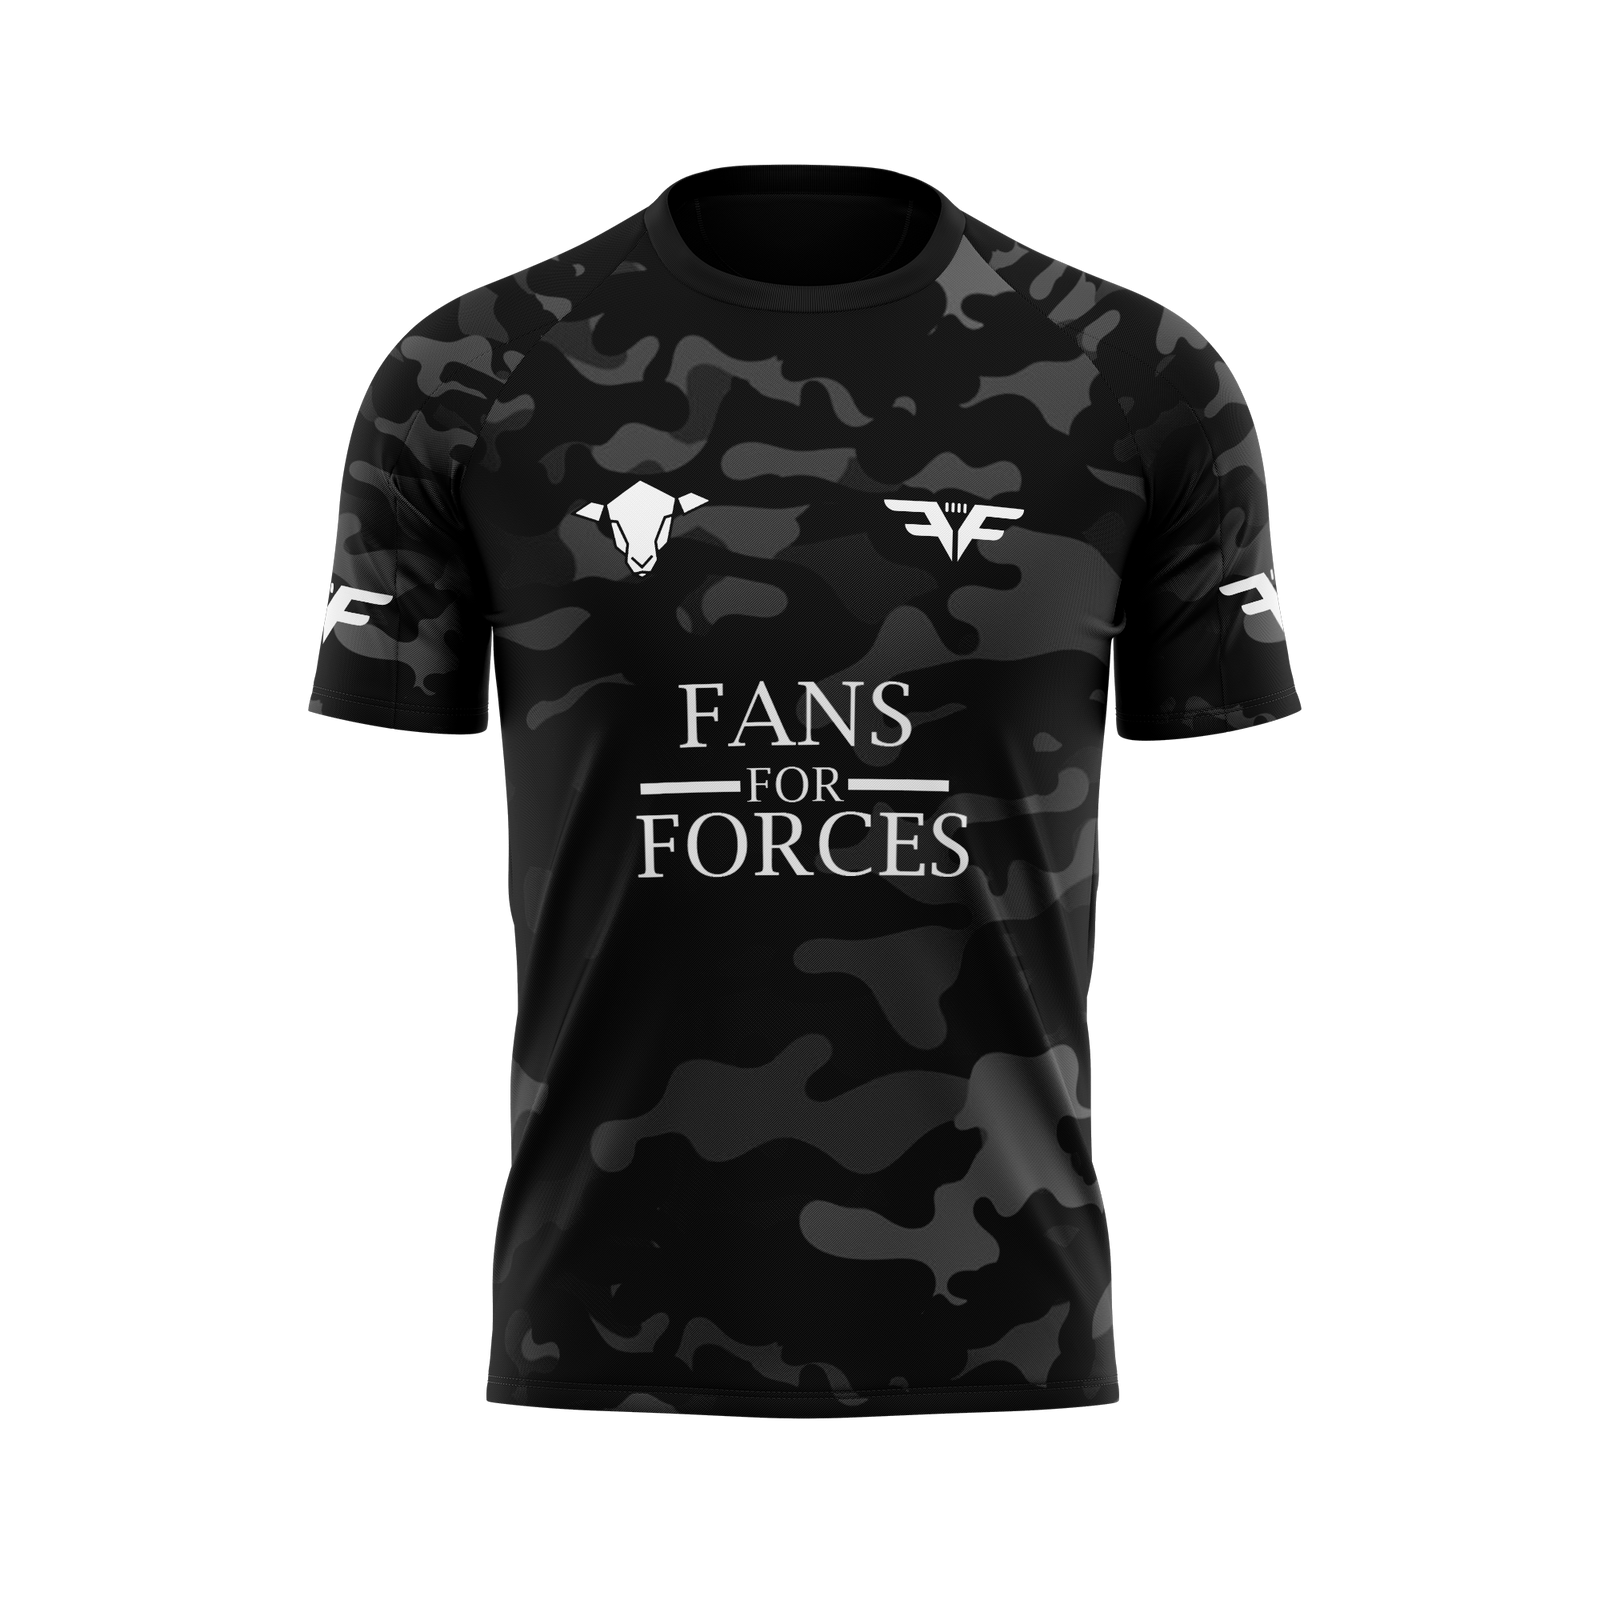 Ladies Fans for Forces Blackout Charity Tee